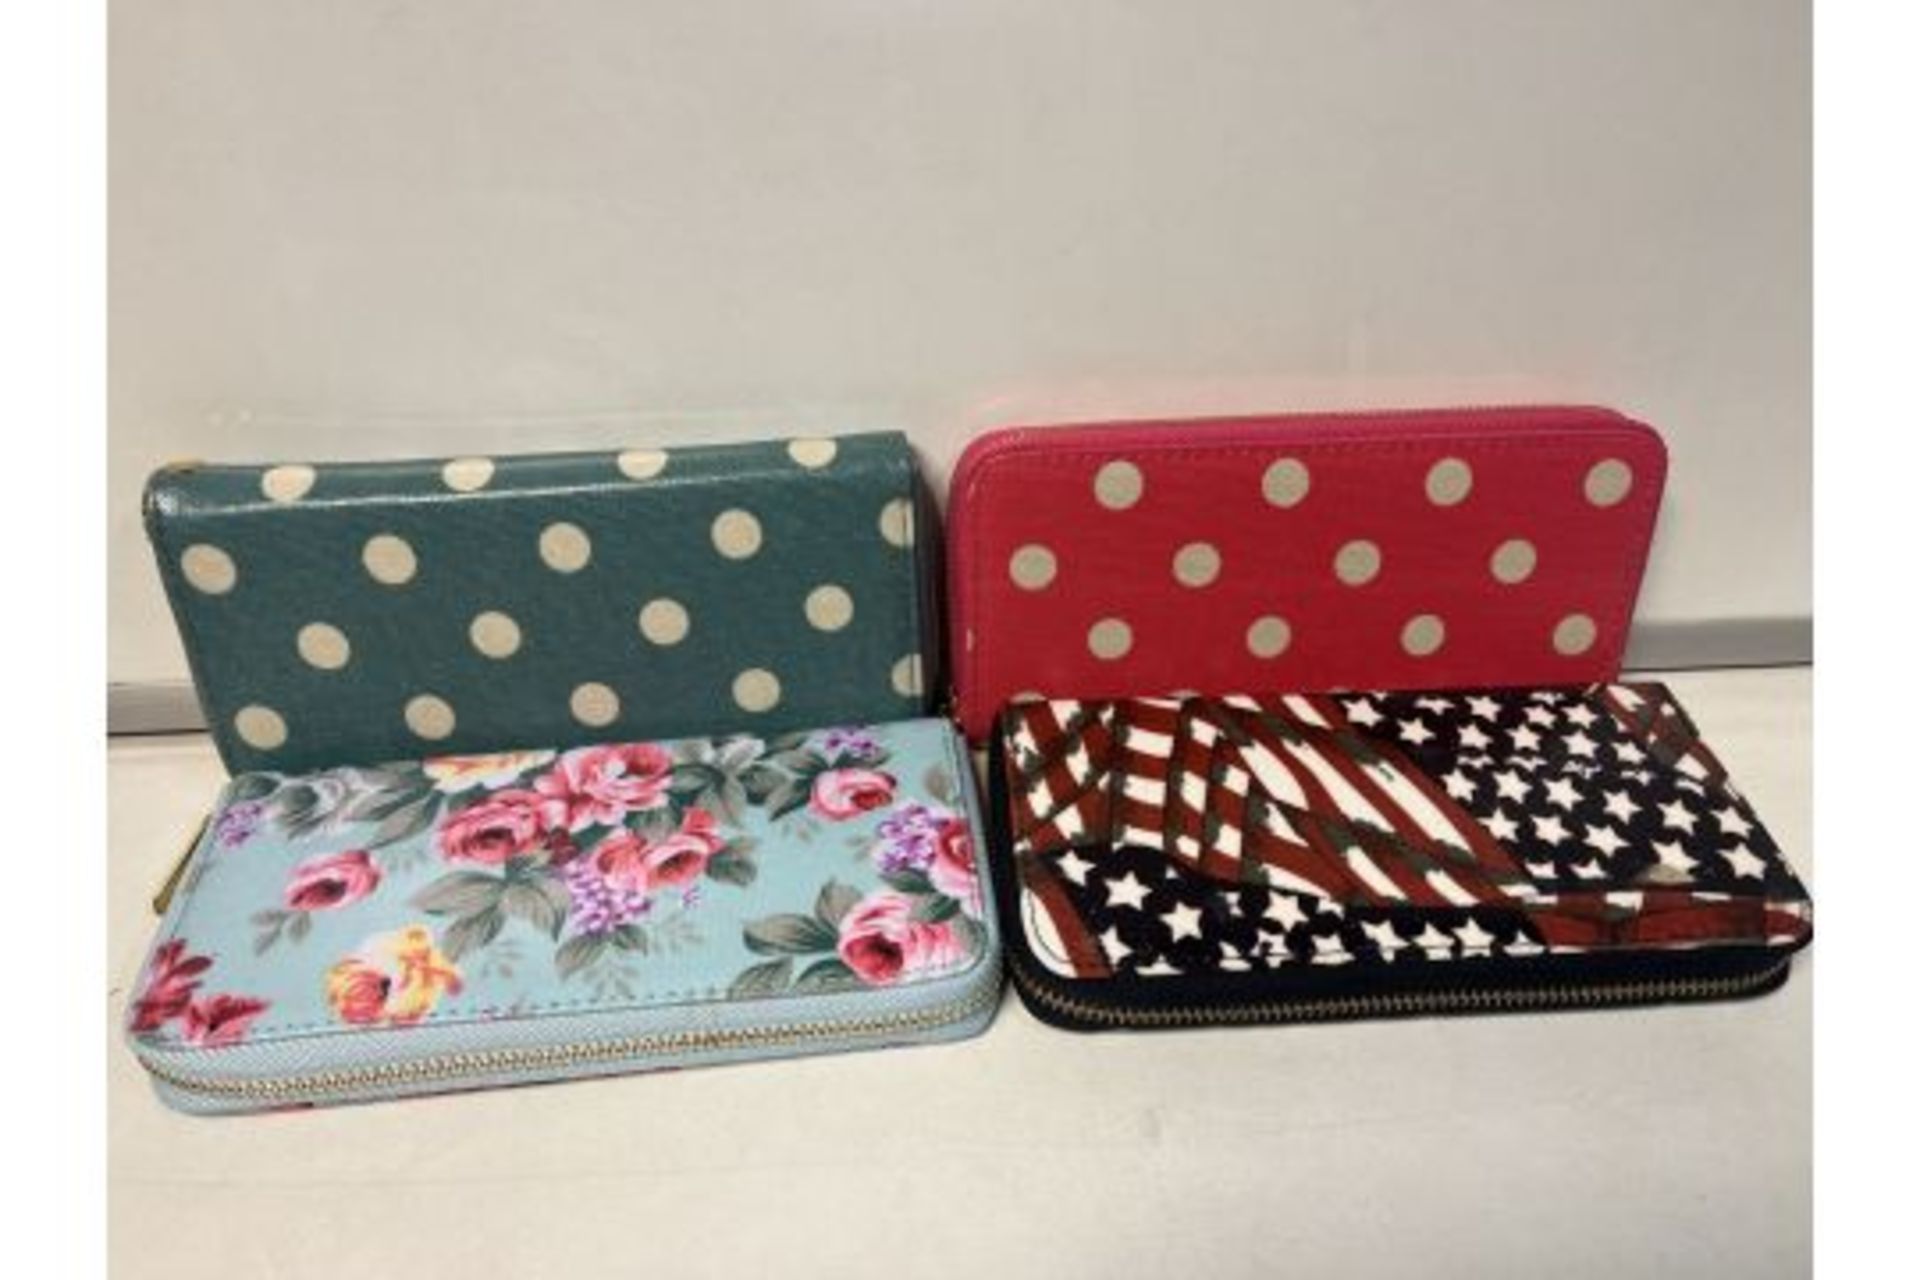 30 x NEW PACKAGED LARGE LADIES PURSES. IN ASSORTED DESIGNS (ROW1)